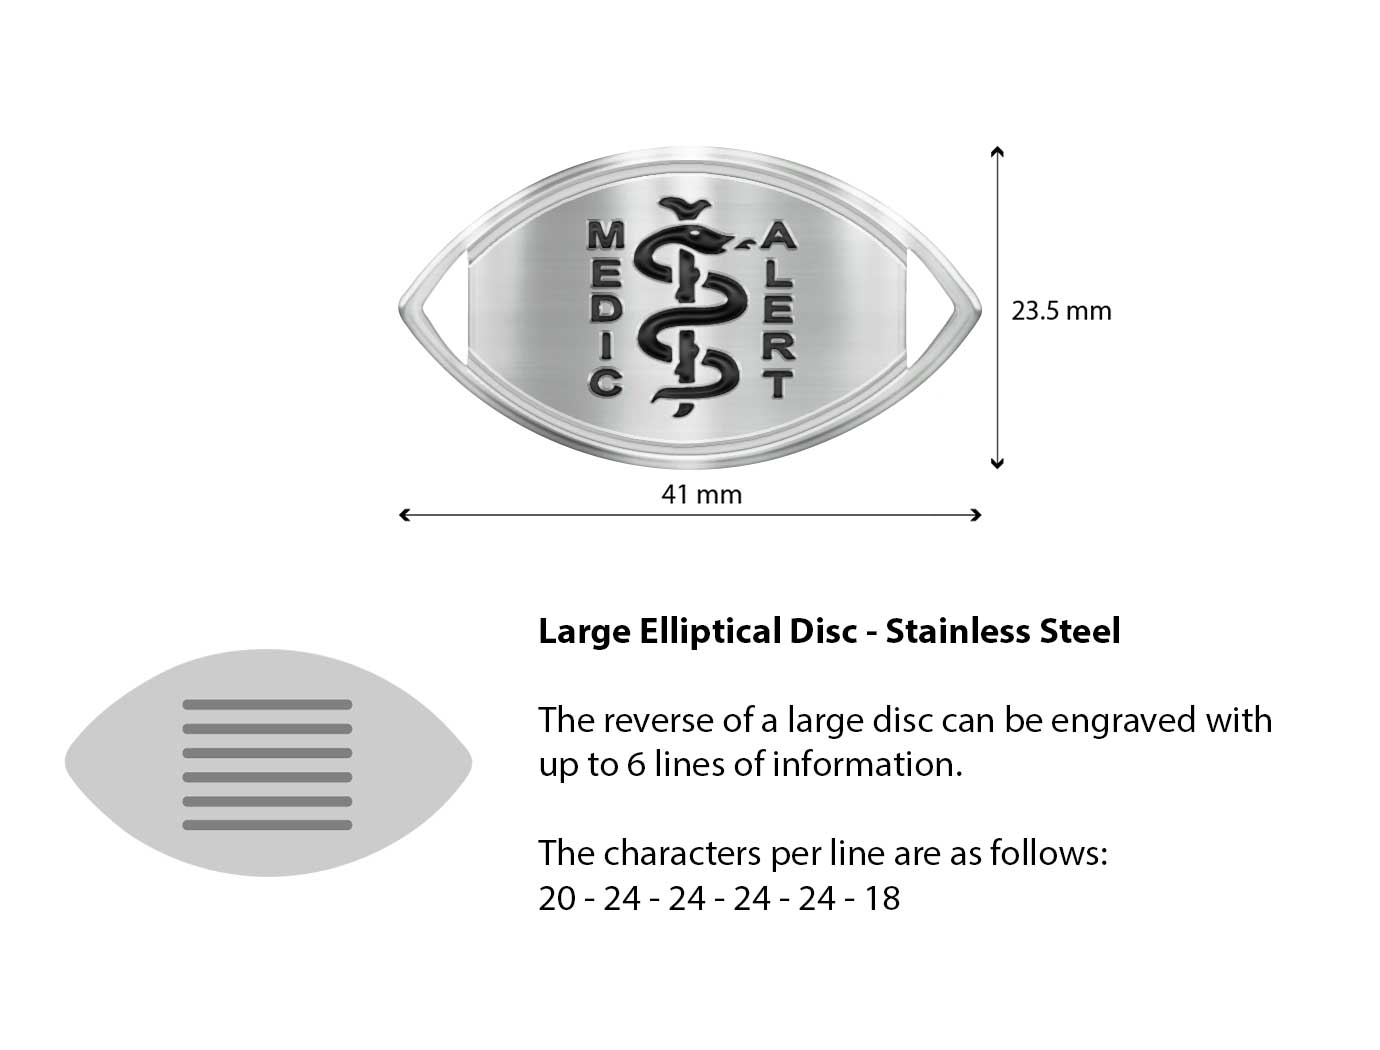 Diagram of the MedicAlert precious metal cable disc with measurements and descriptions of the engraving specifications